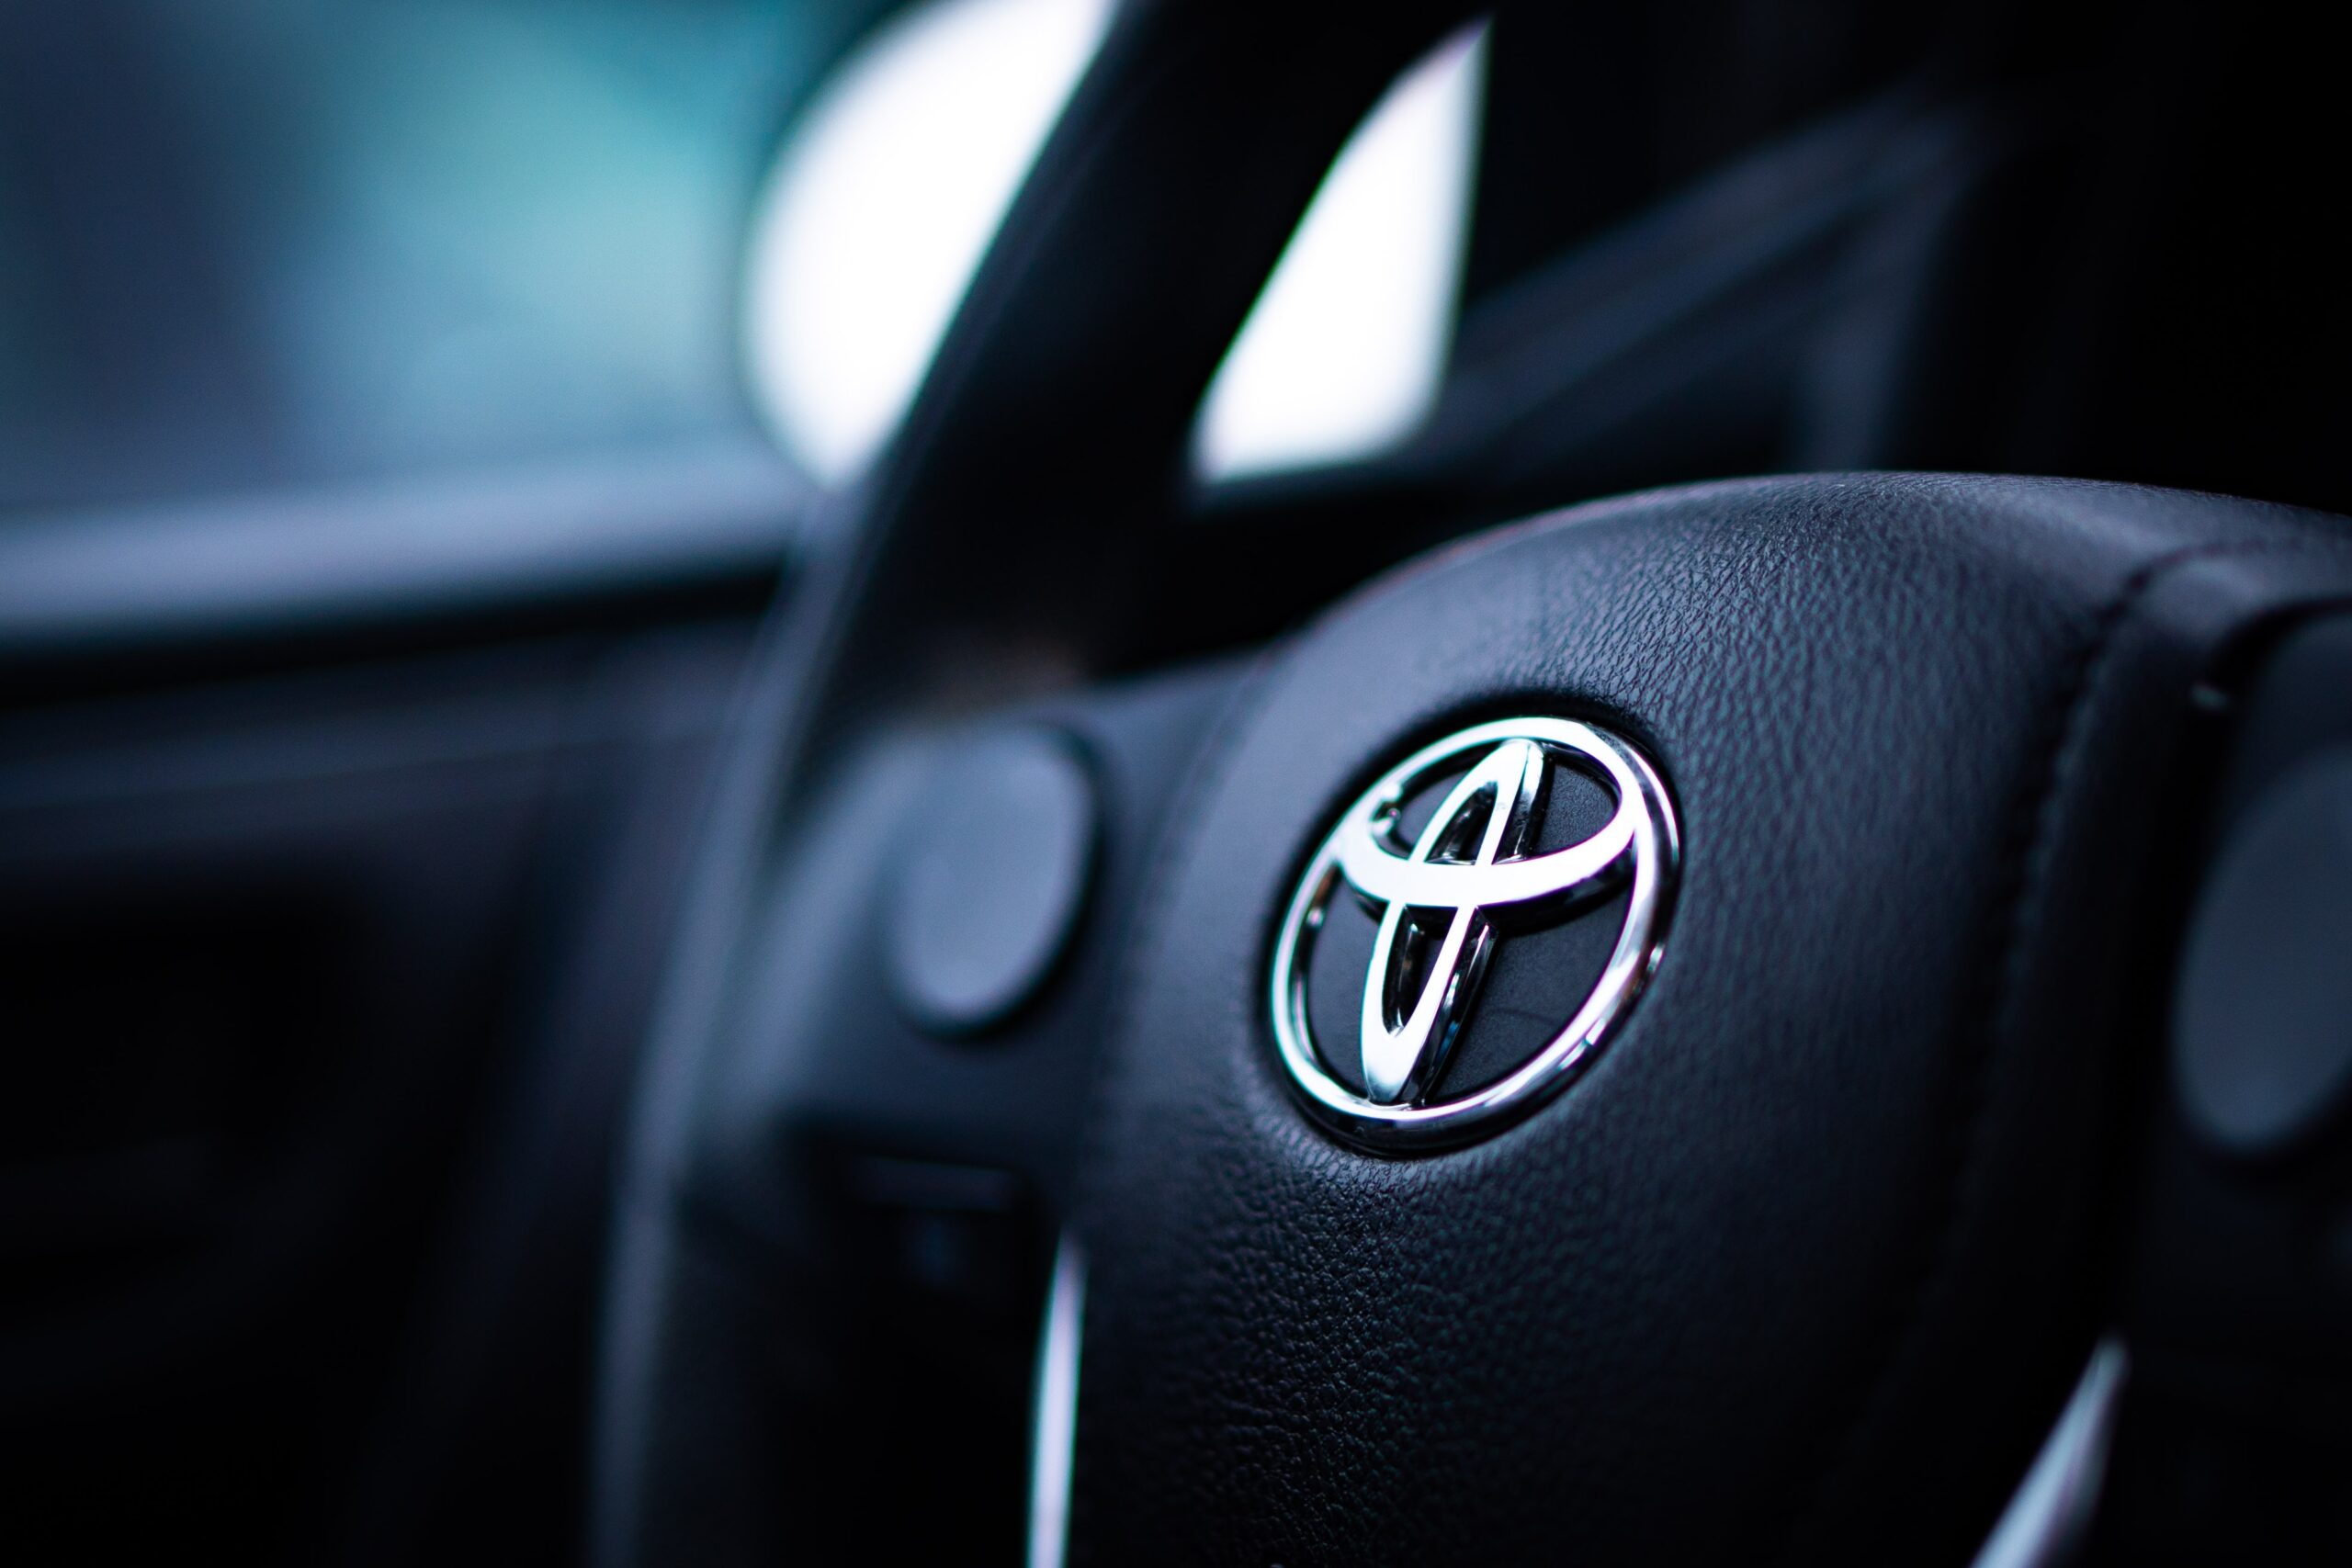 Image of a Toyota Steering Wheel.